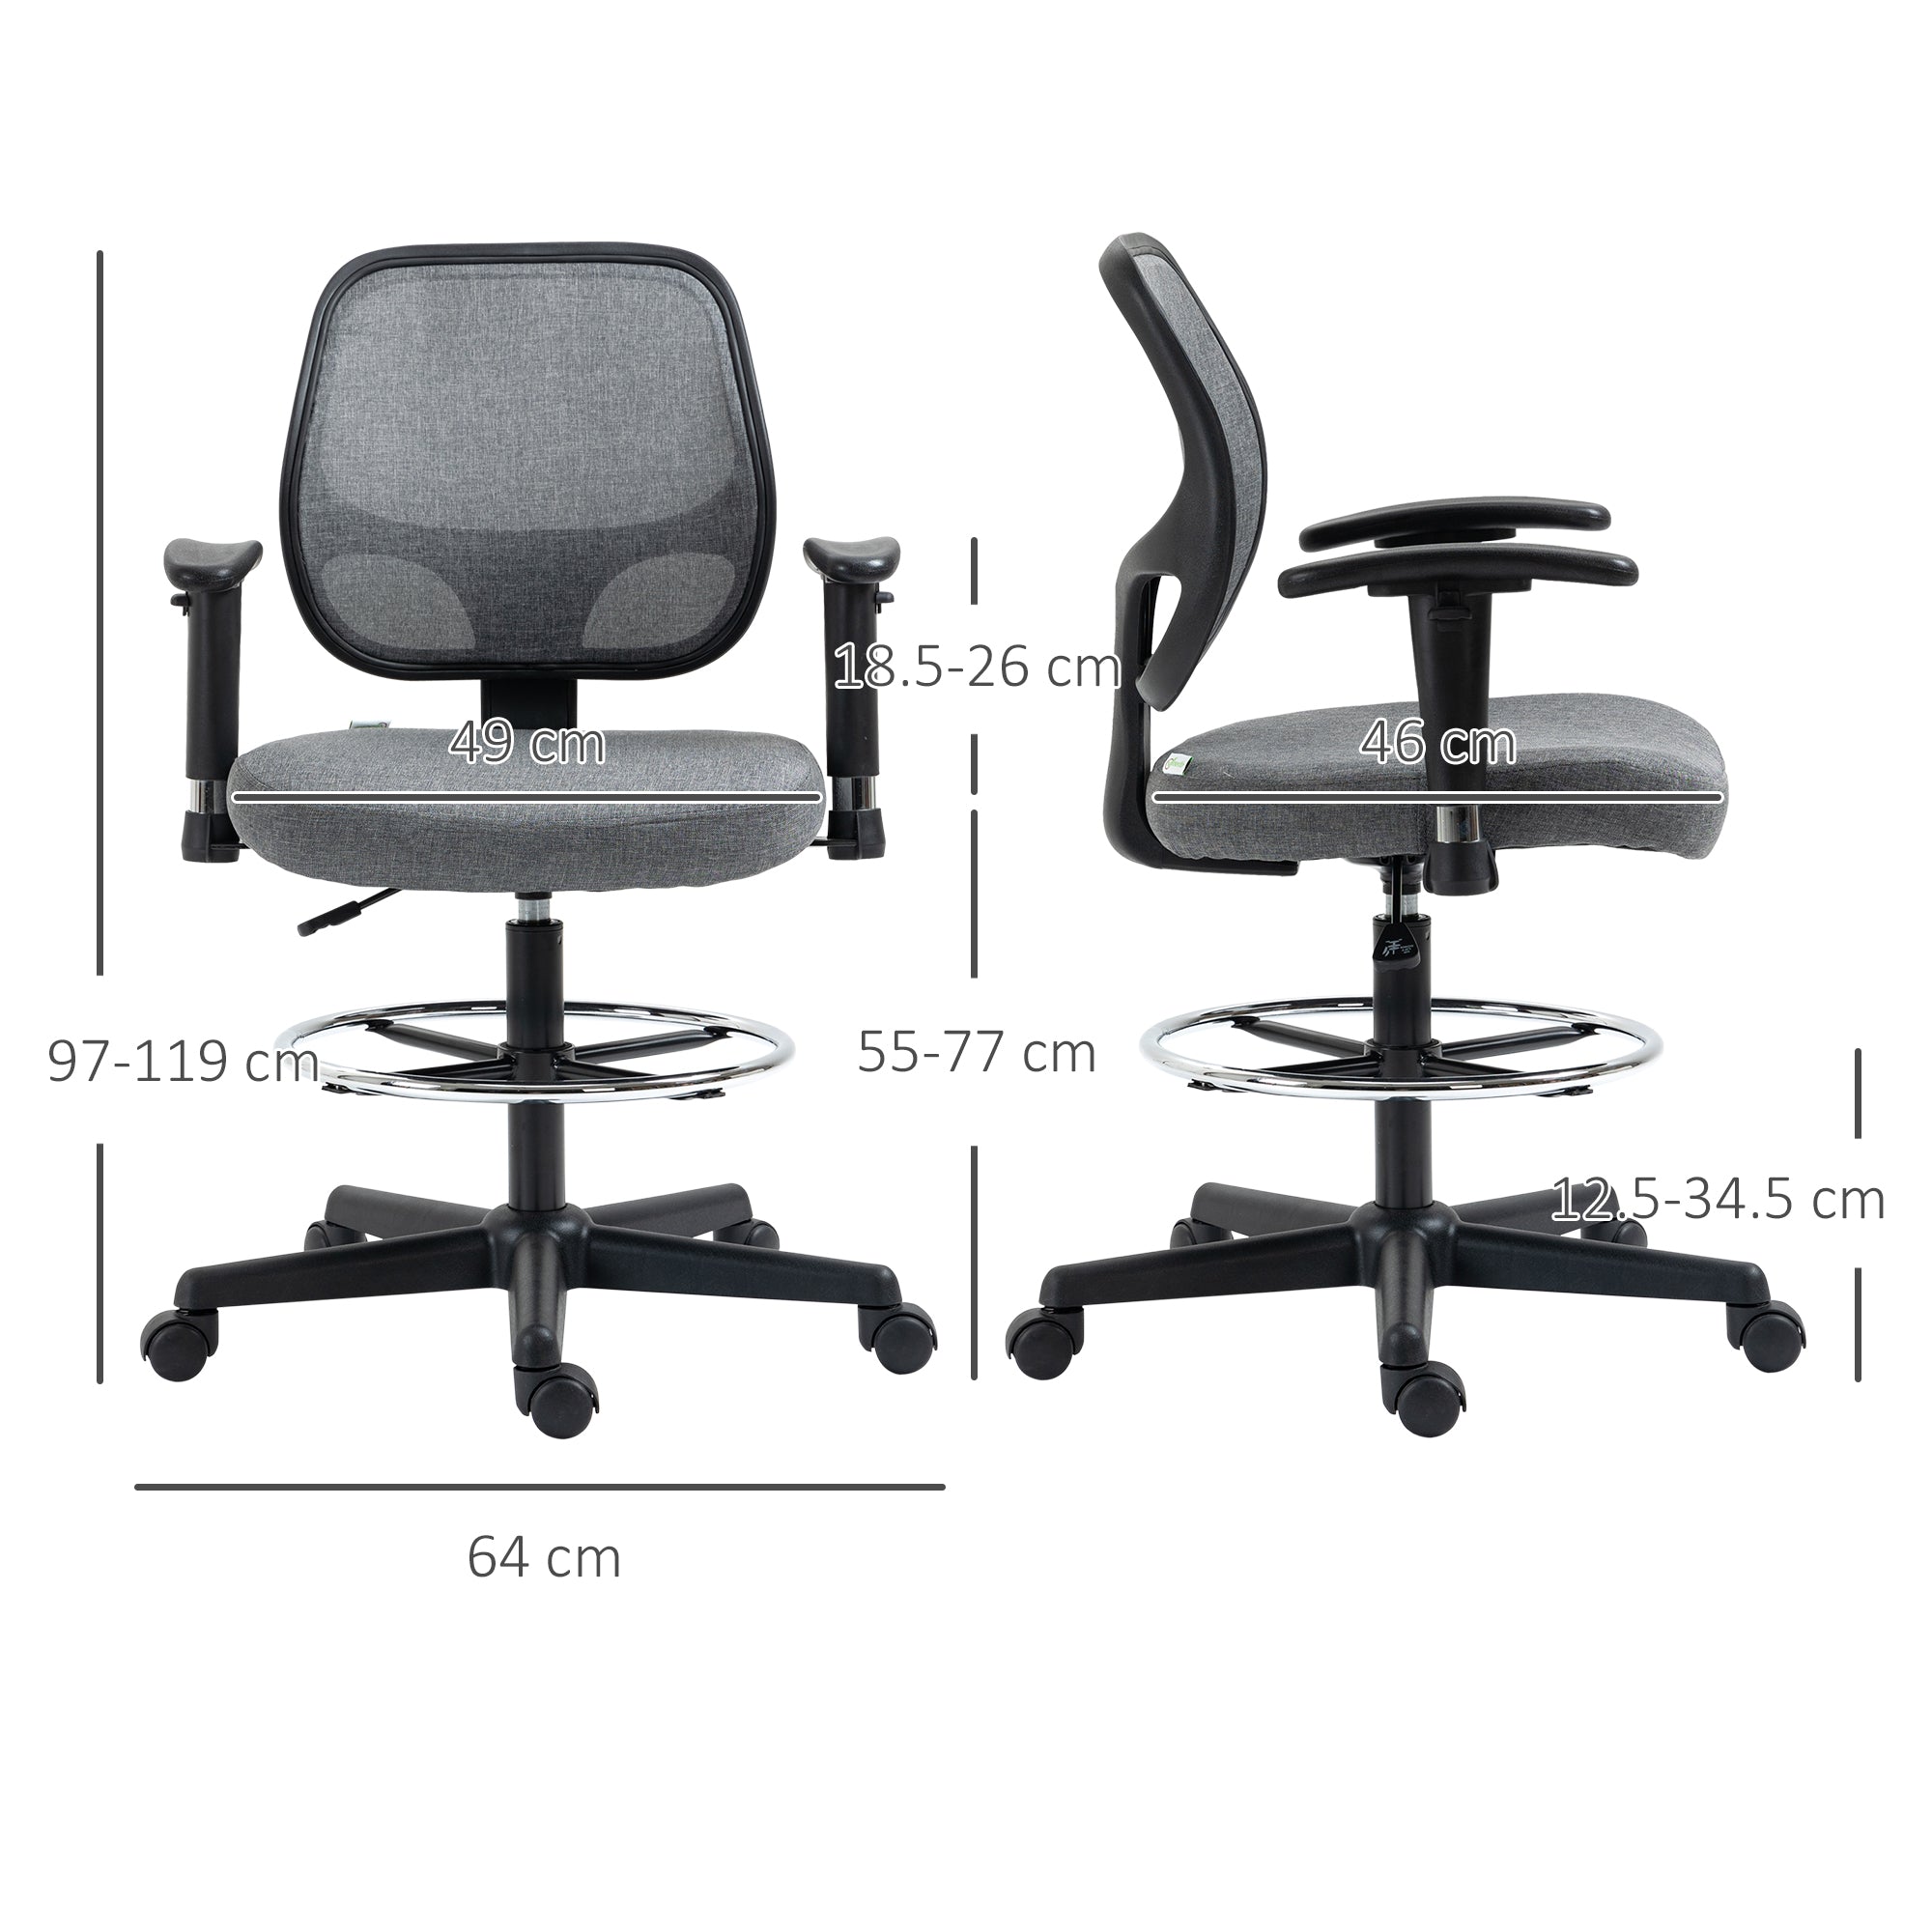 Drafting Chair Tall Office Fabric Standing Desk Chair with Adjustable Footrest Ring, Arm, Swivel Wheels, Grey-2